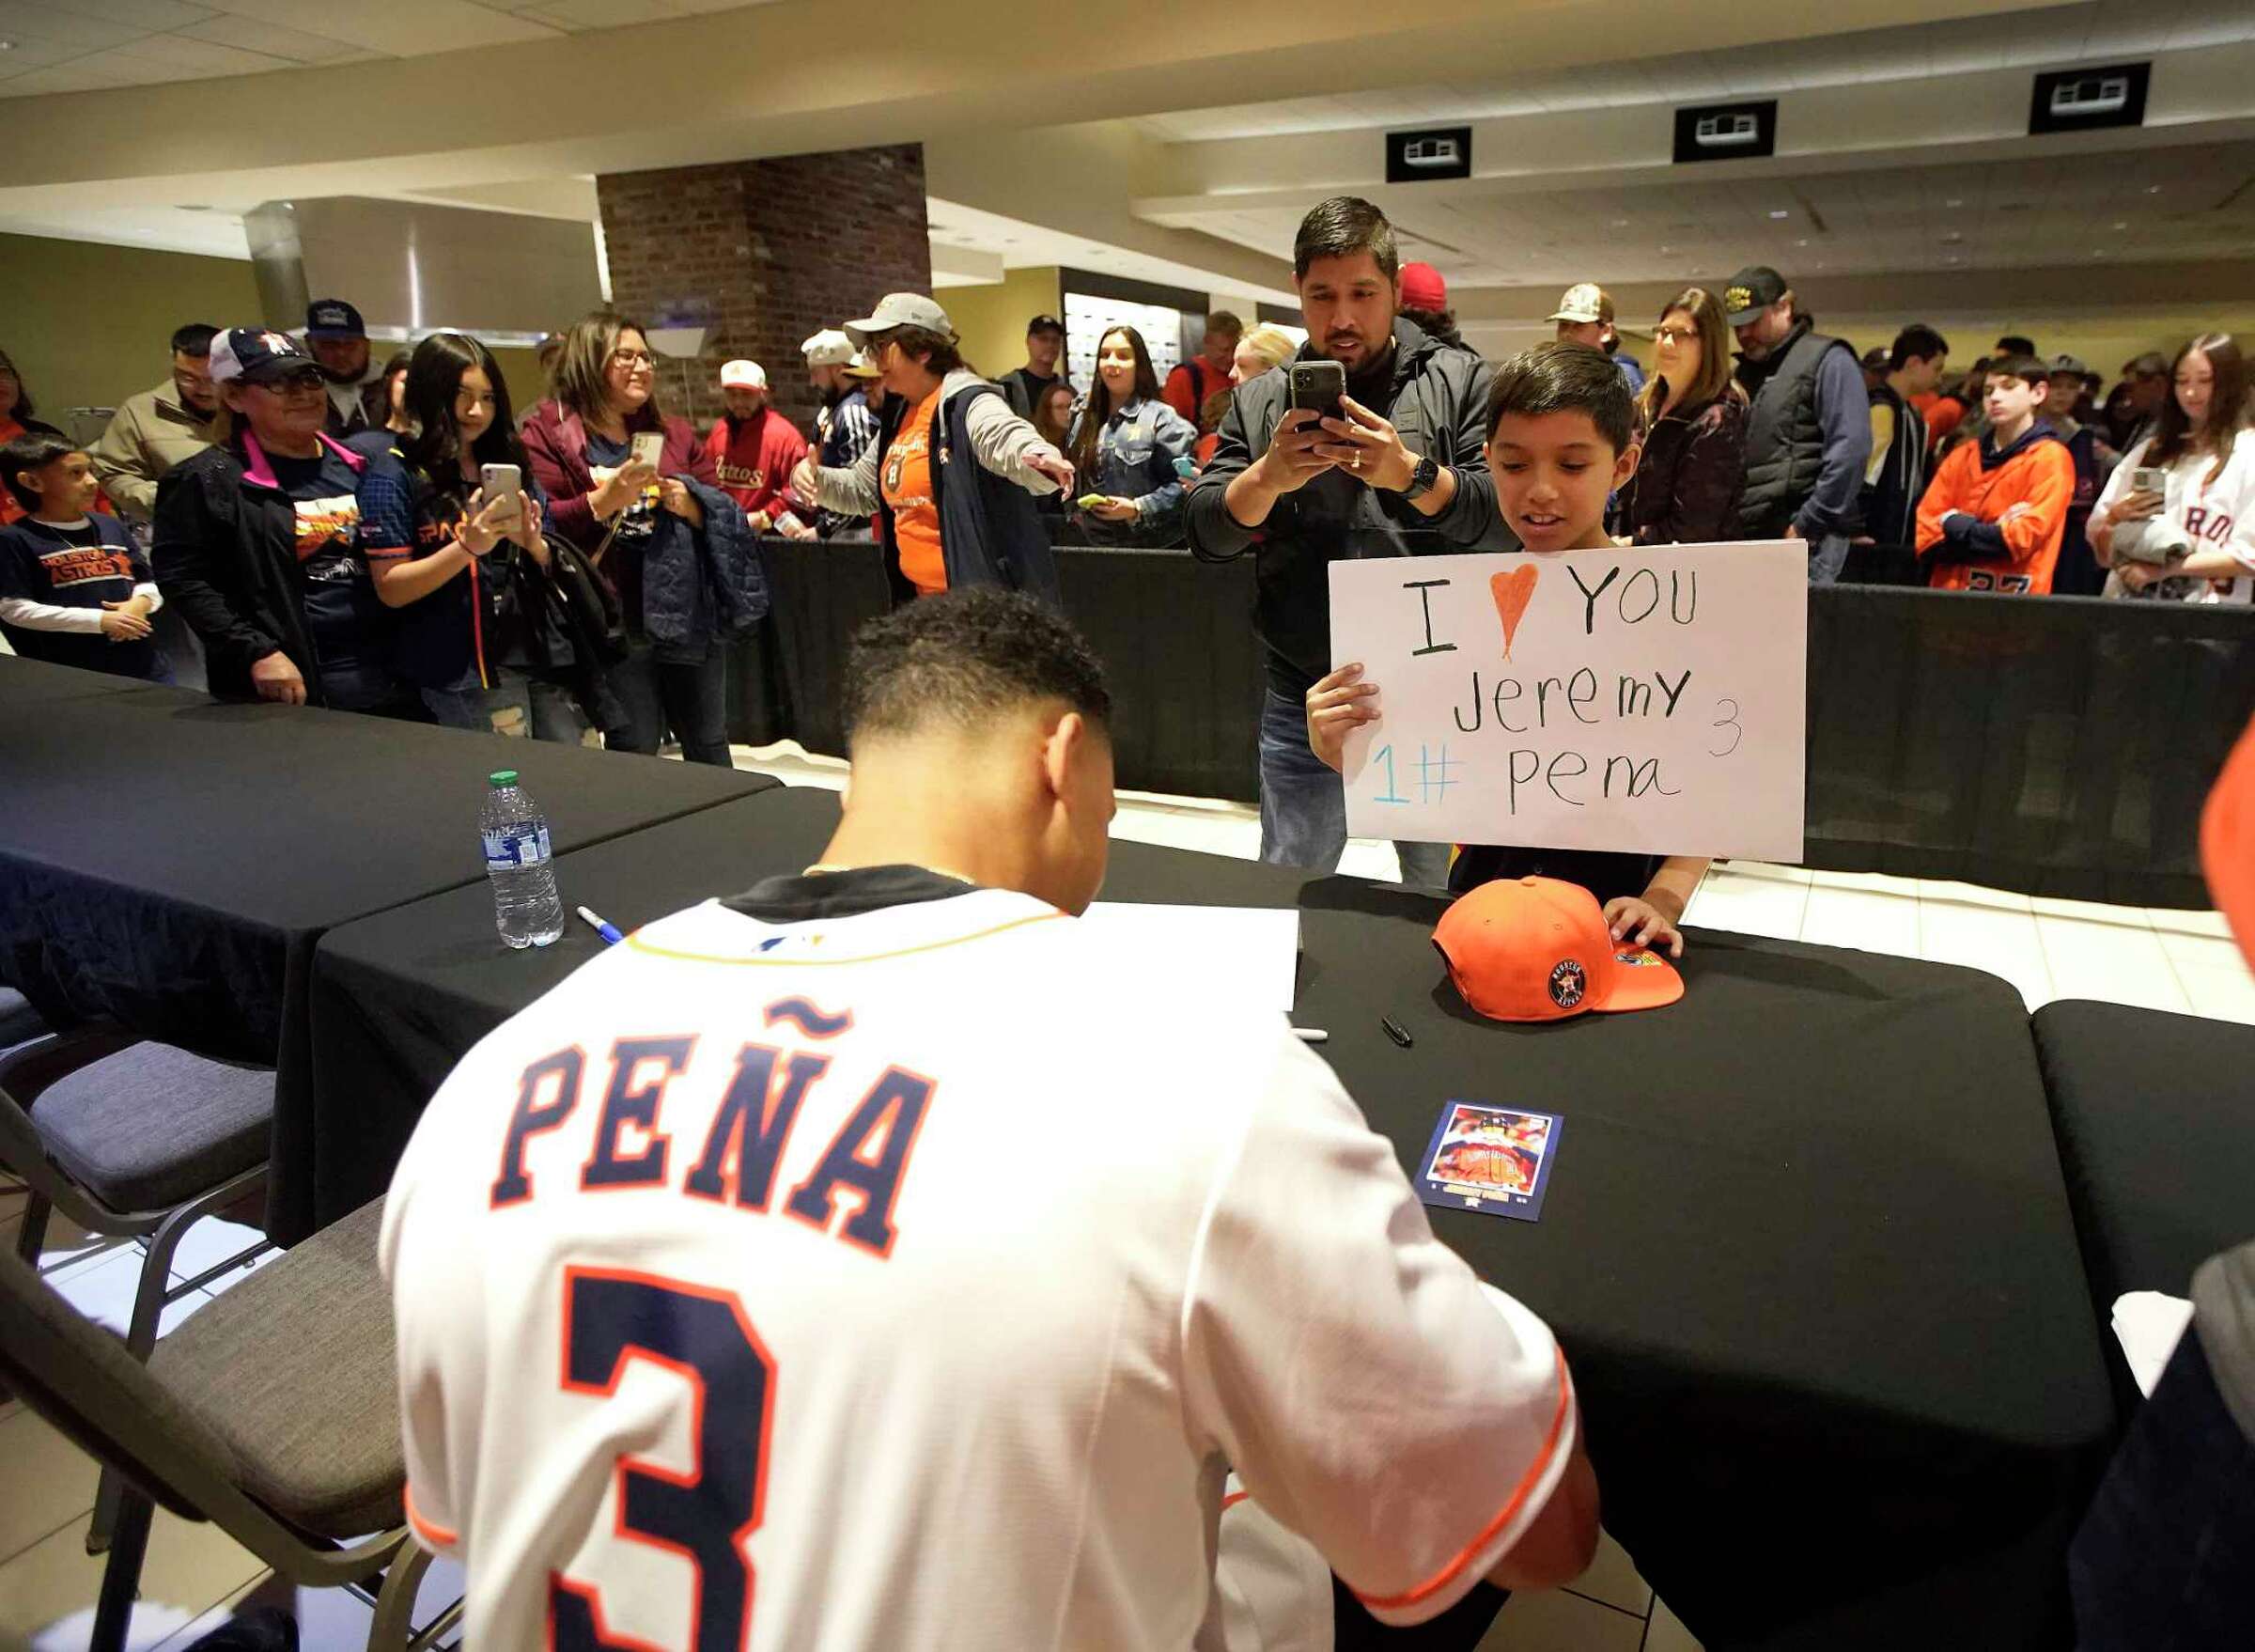 Official mlb houston astros jeremy pena we have jersey shirt